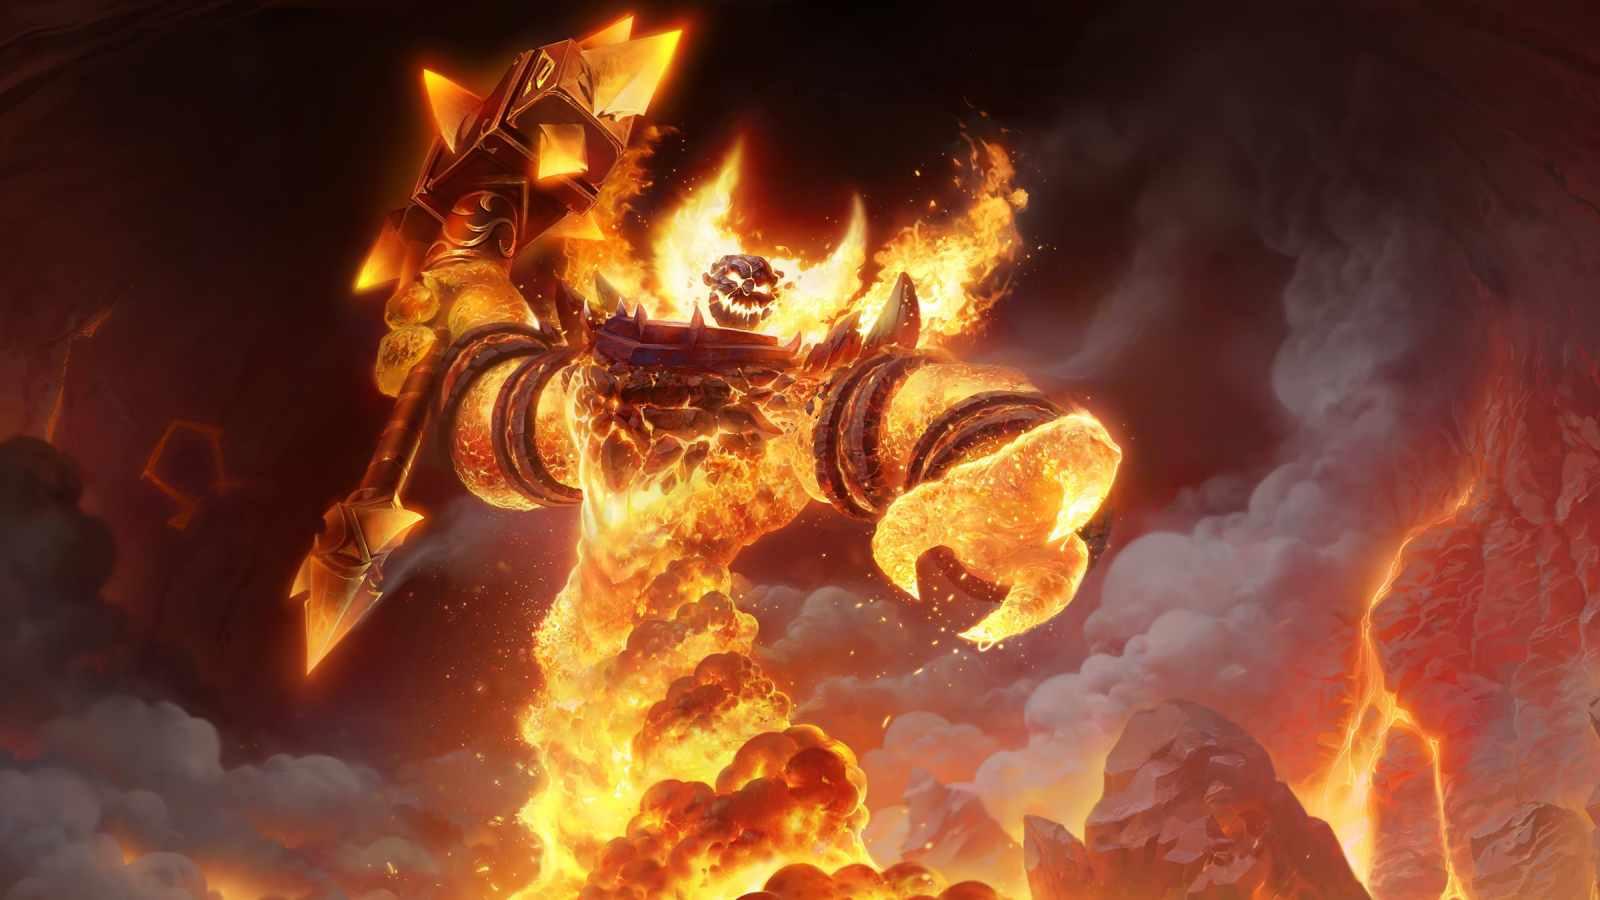 Ragnaros from wow (GDKP story)